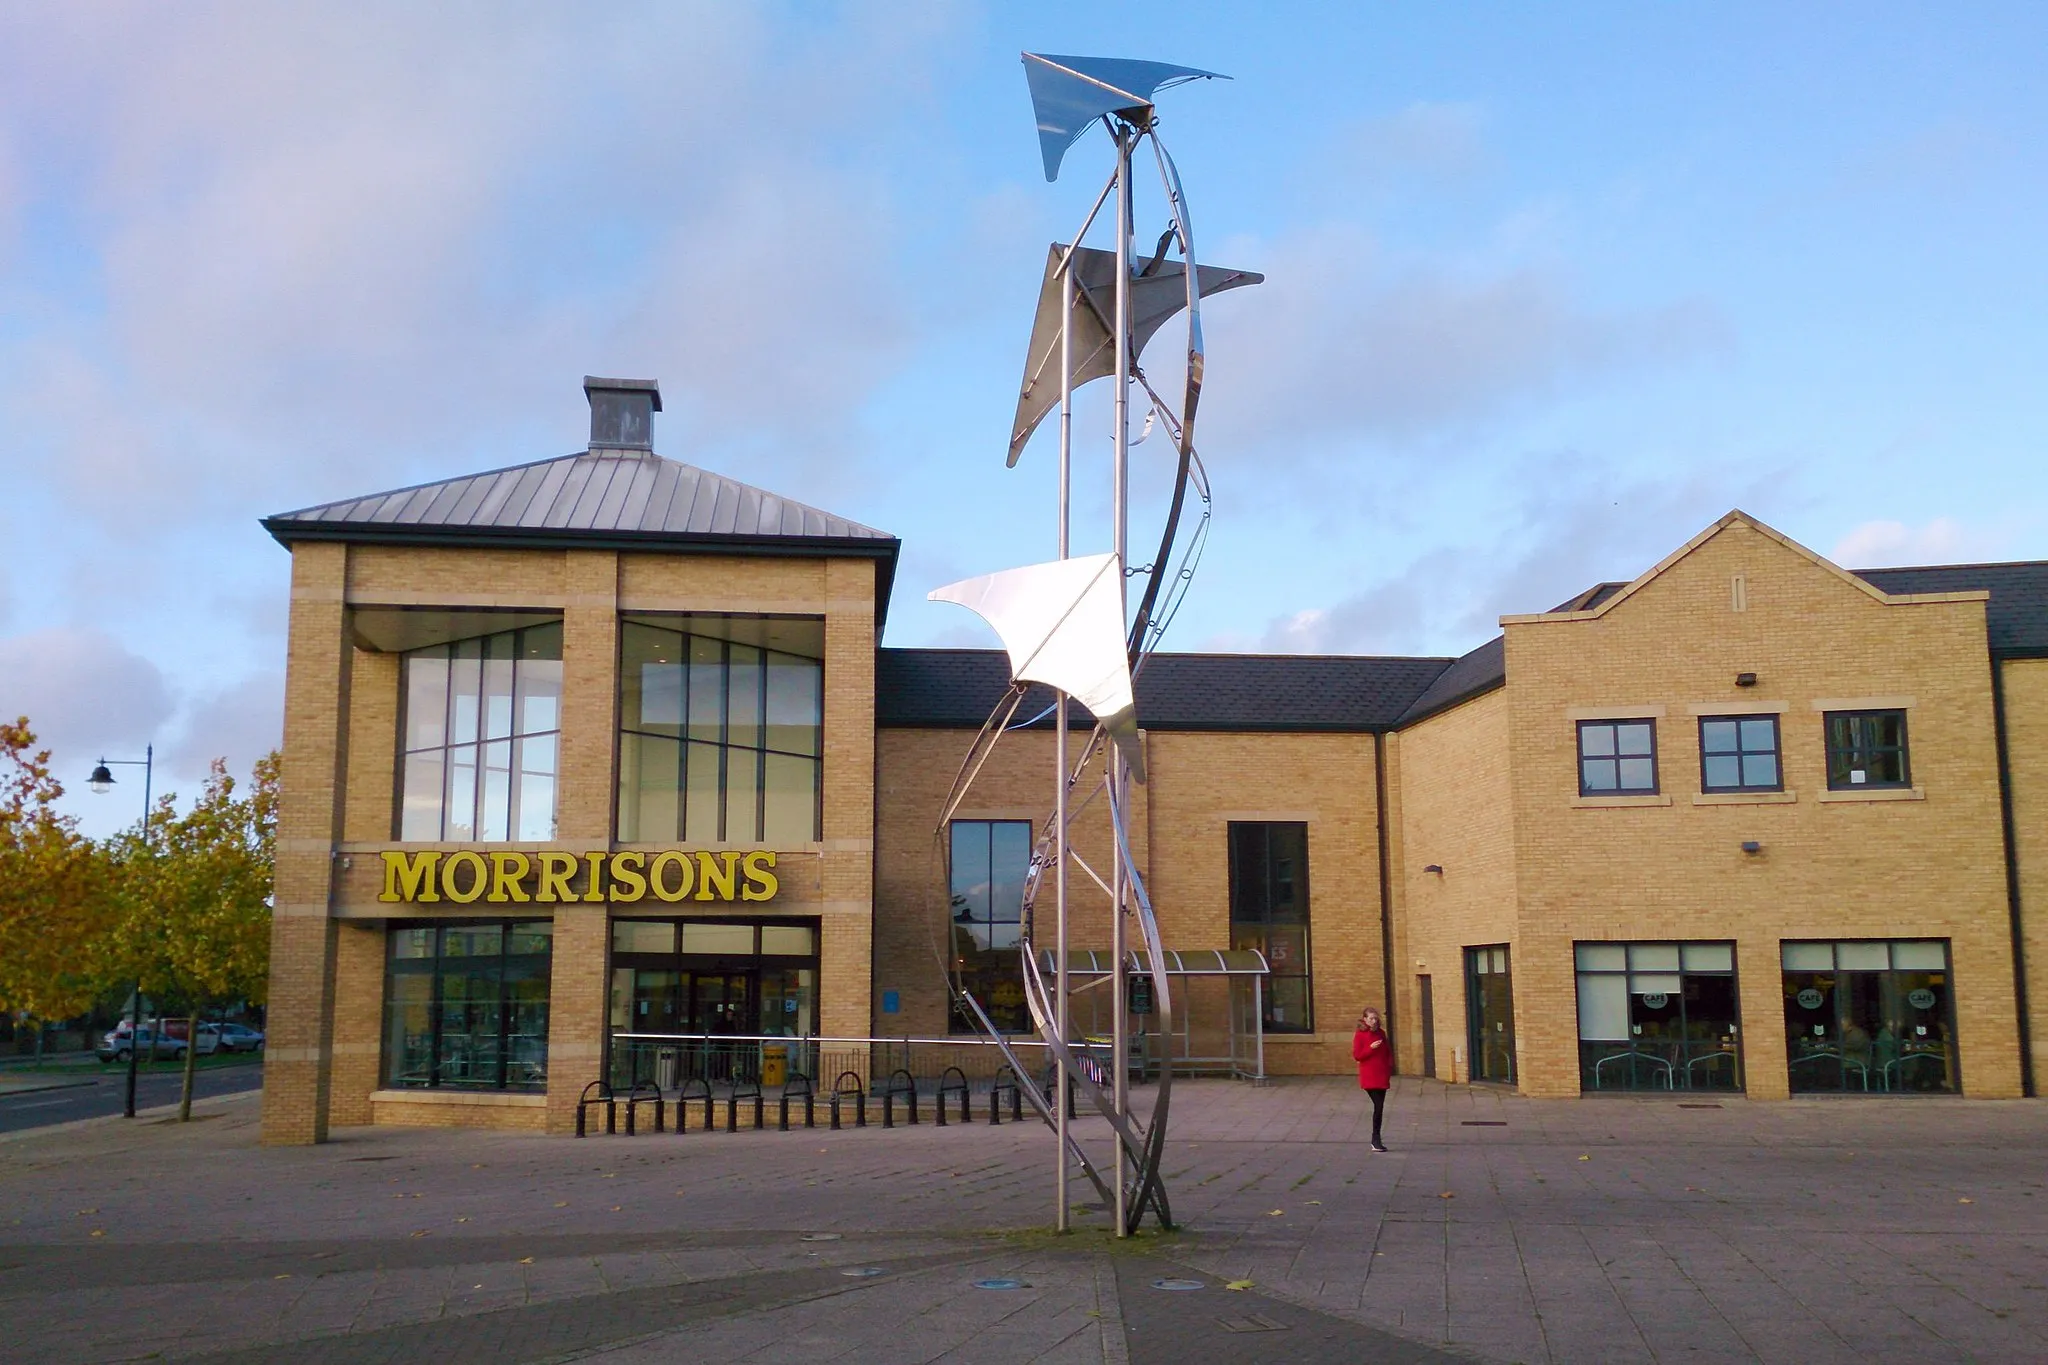 Photo showing: Cambourne Morrisons supermarket and Richard Thornton flight-themed sculpture commemorating the area's connections with the Royal Air Force and World War 2 aeroplane production.